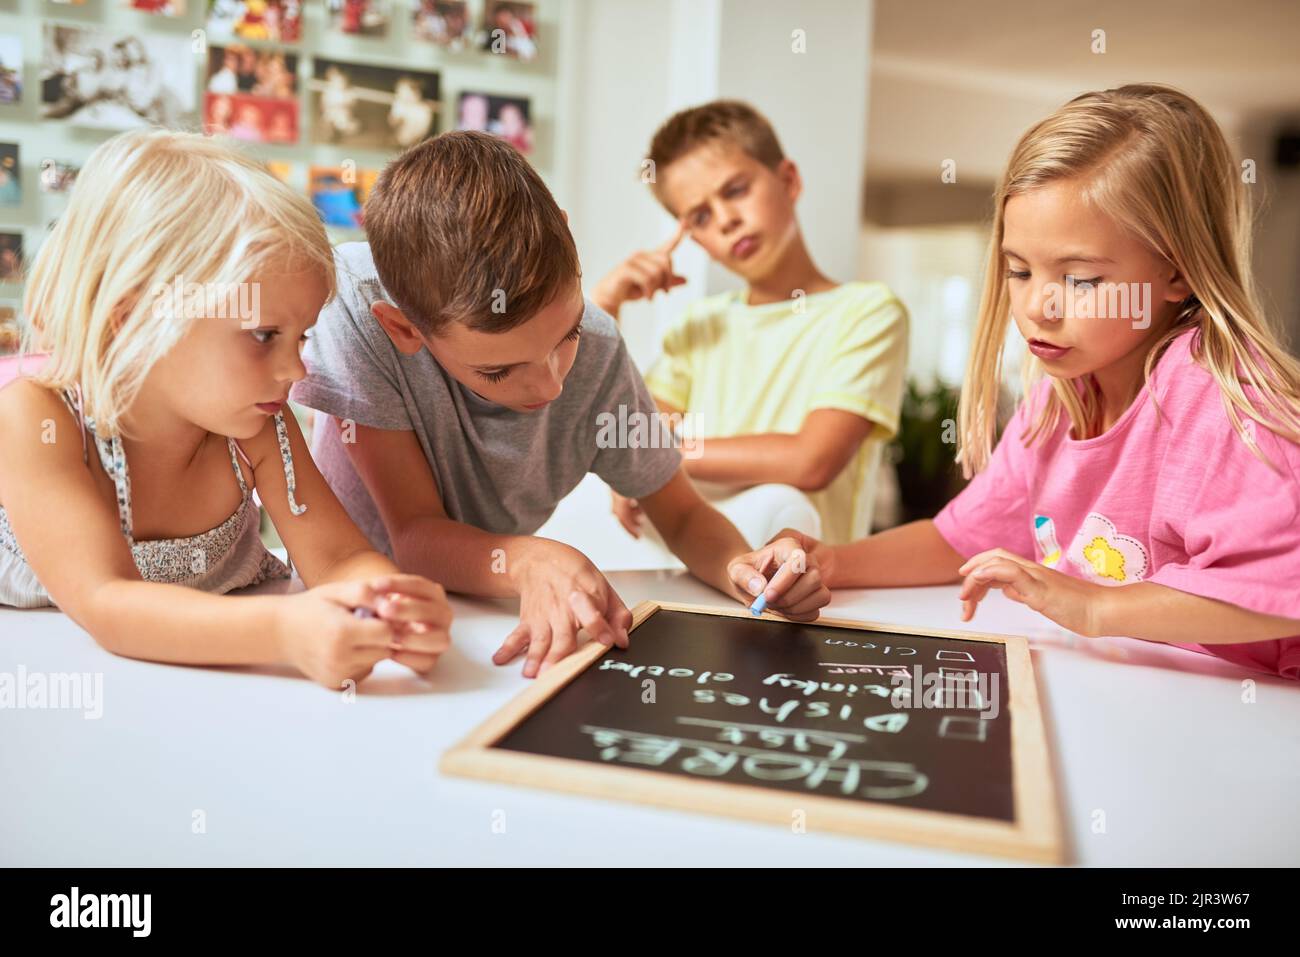 Doing chores teaches kids to take responsibility. kids writing a list of chores on a chalkboard at home. Stock Photo